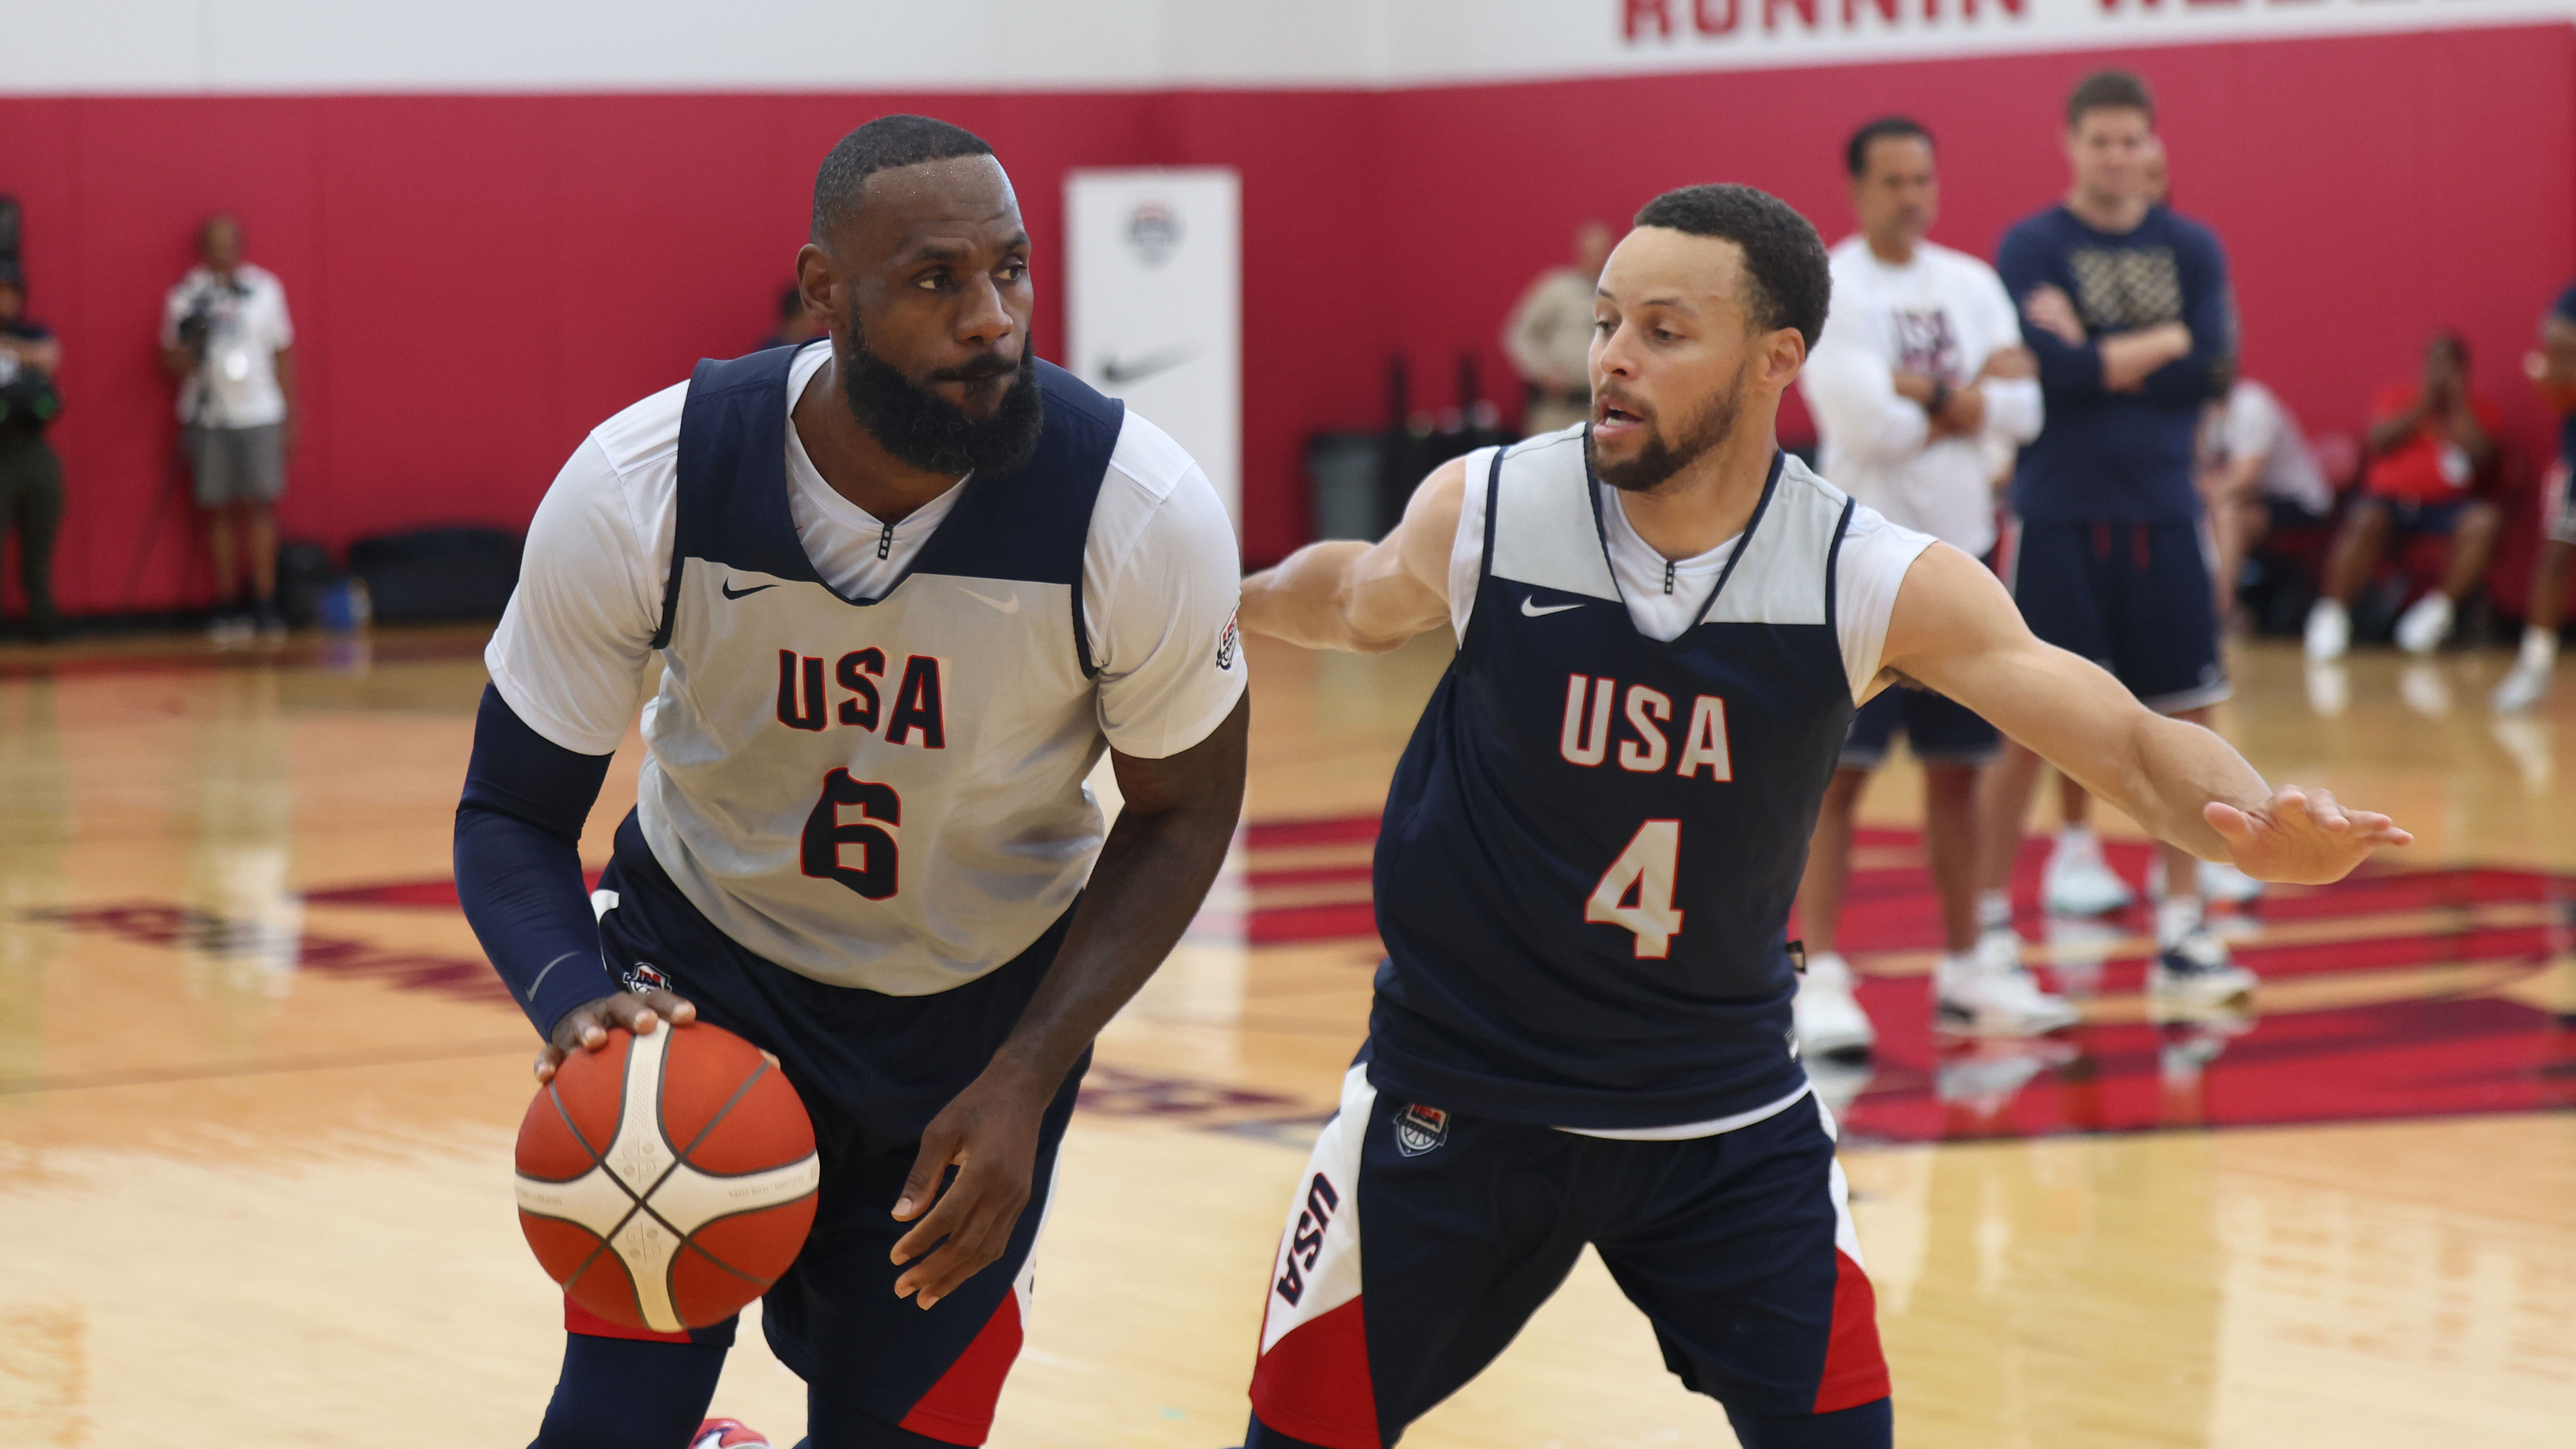 Here's the US men's basketball team's full exhibition and Olympic schedule